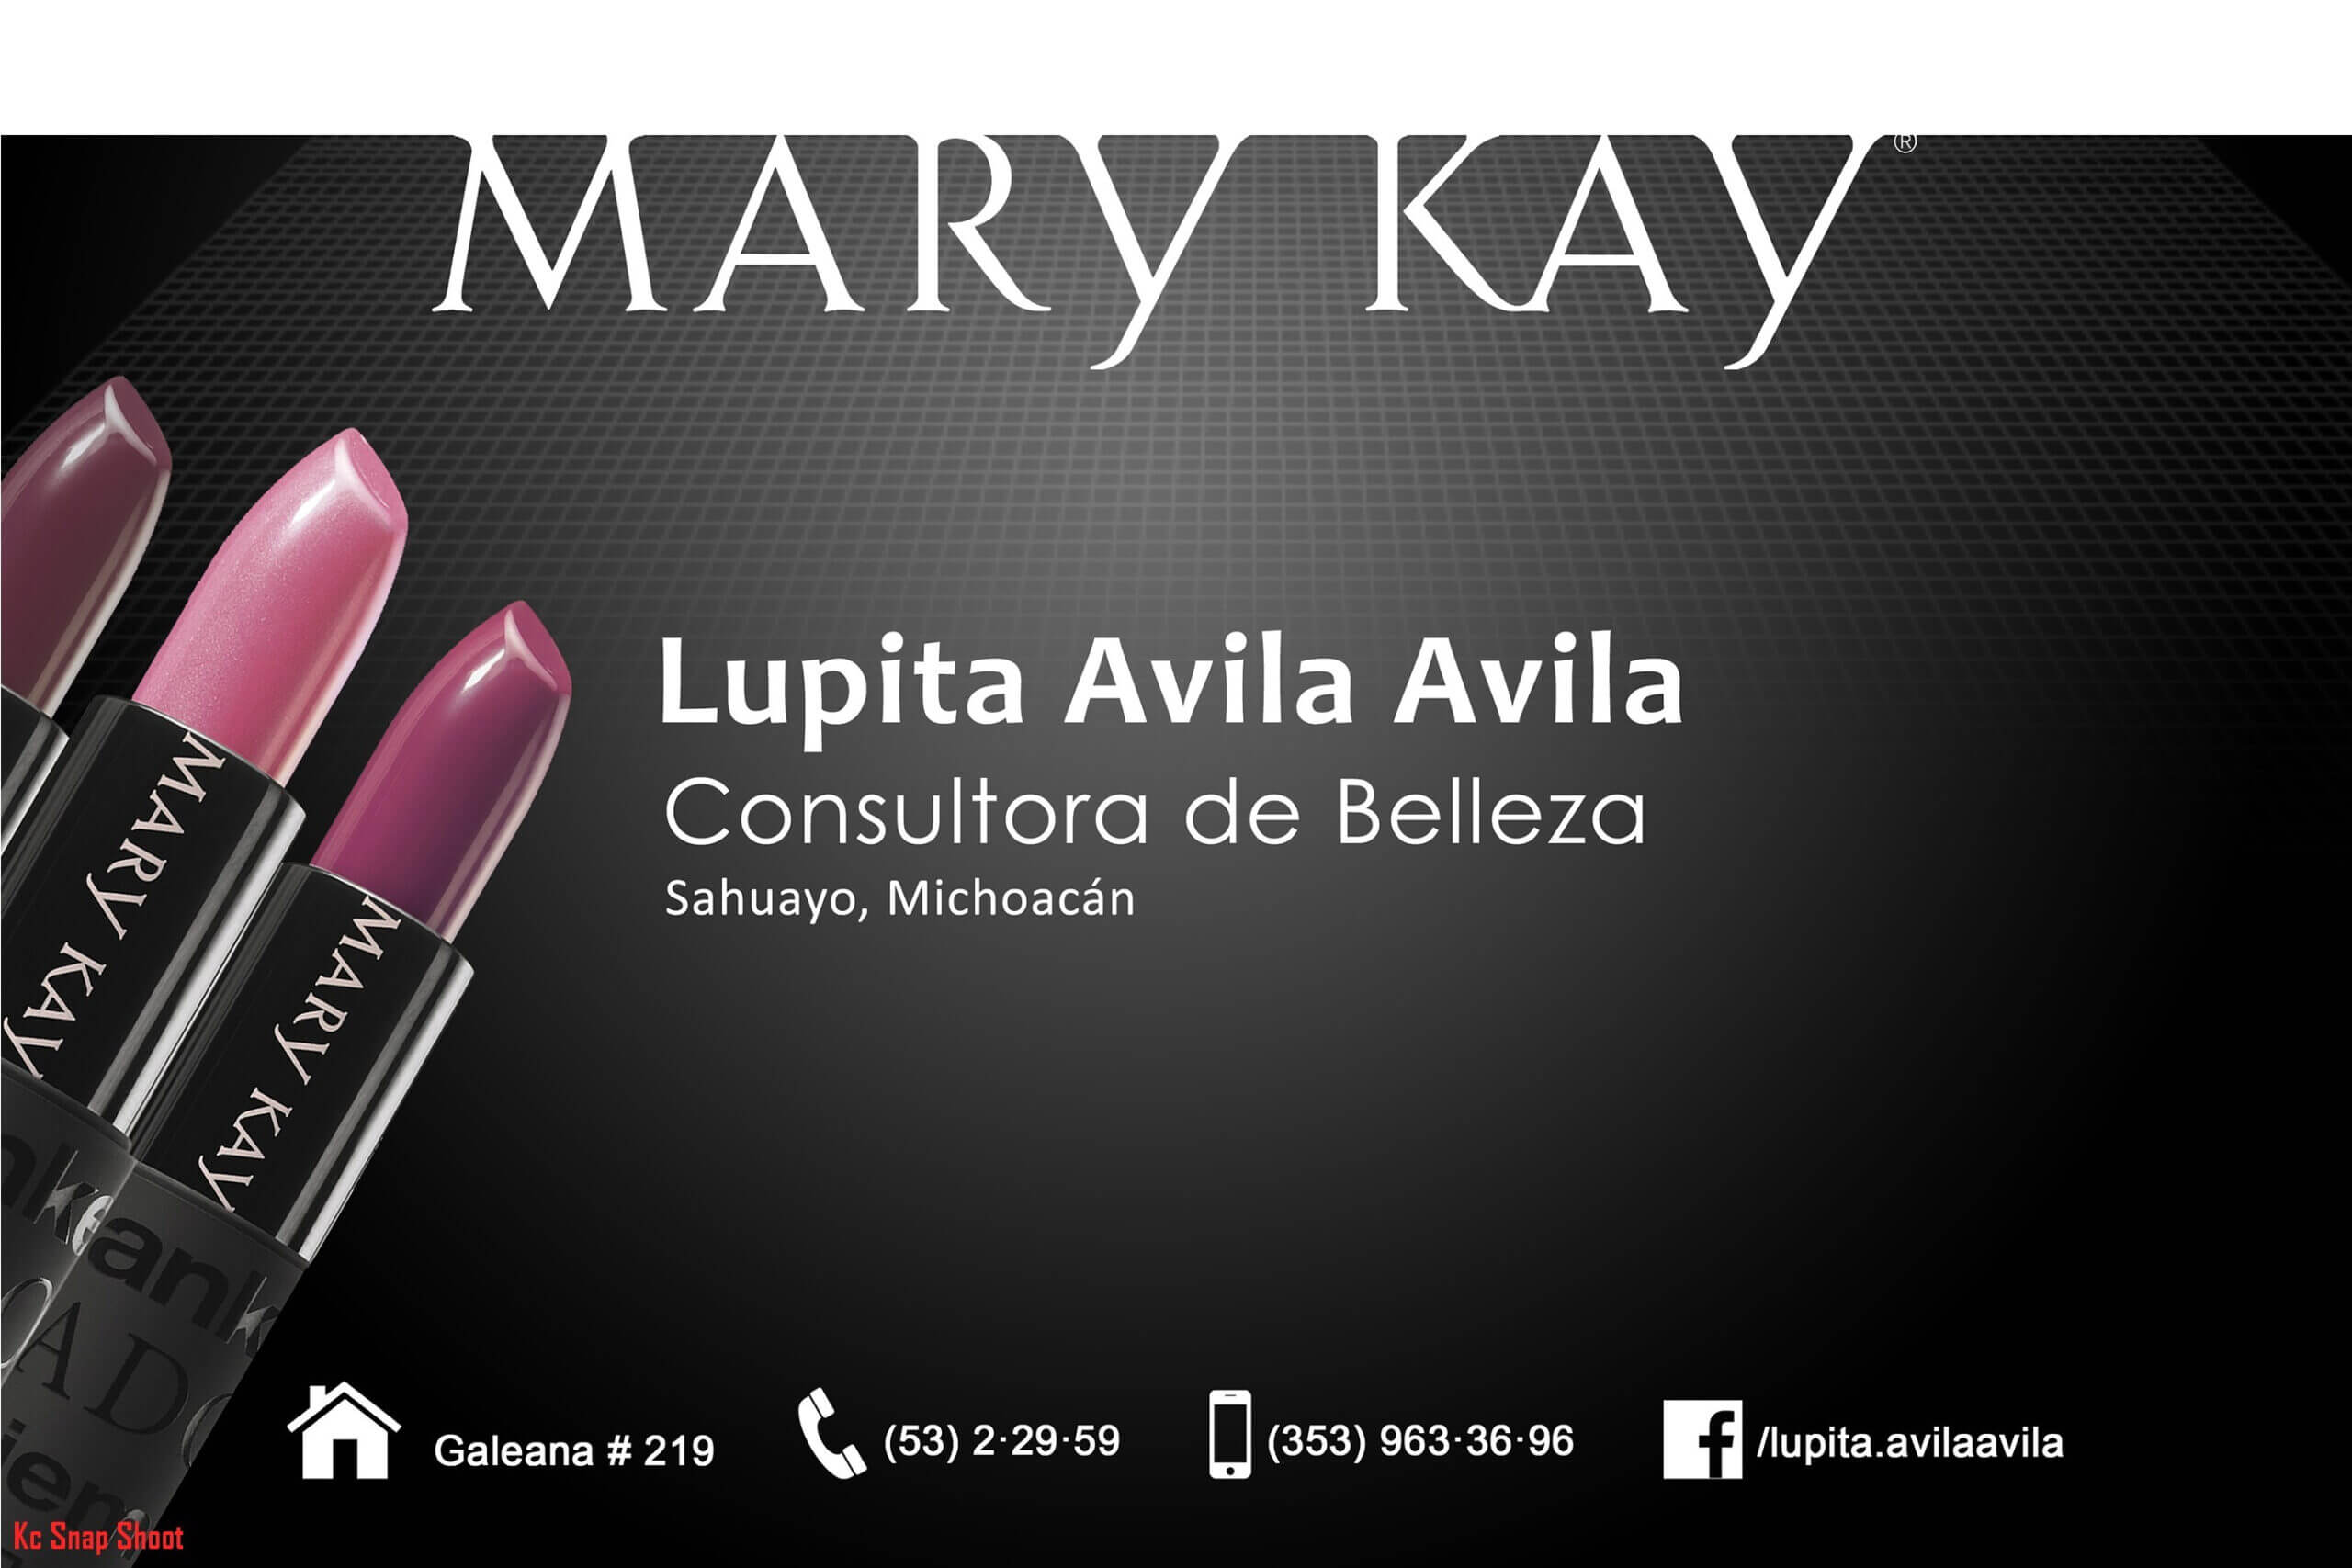 69 Mary Kay Wallpapers On Wallpaperplay In Mary Kay Business Cards 